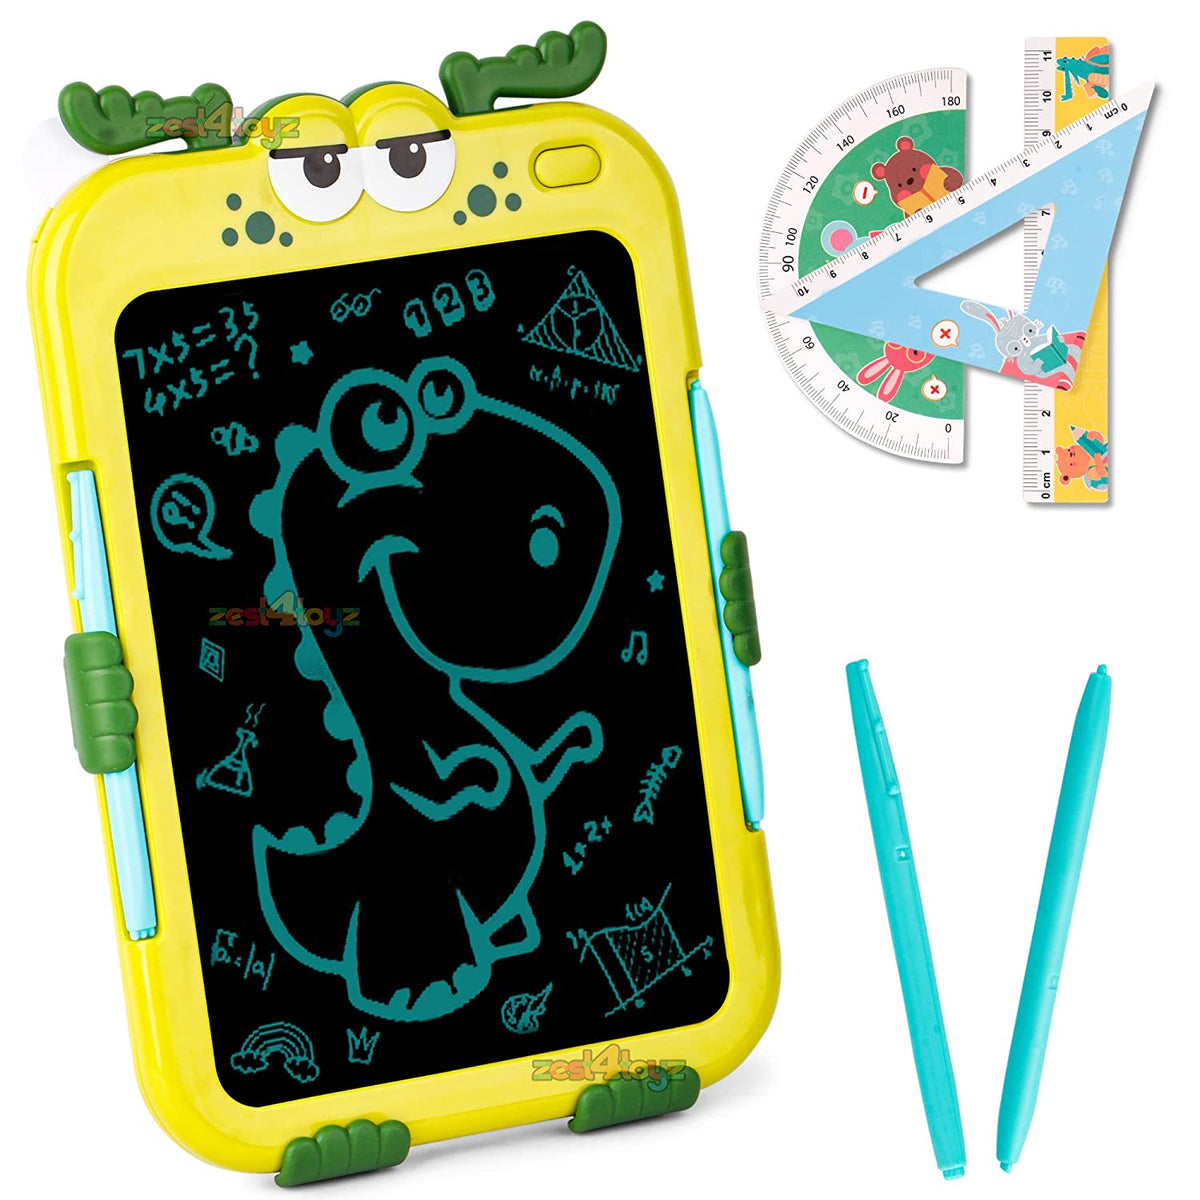 My Doodling Fun Board LCD Drawing Board Writing Pad 8.8-inch Learning Toy for 3-6 Years Boy and Girls